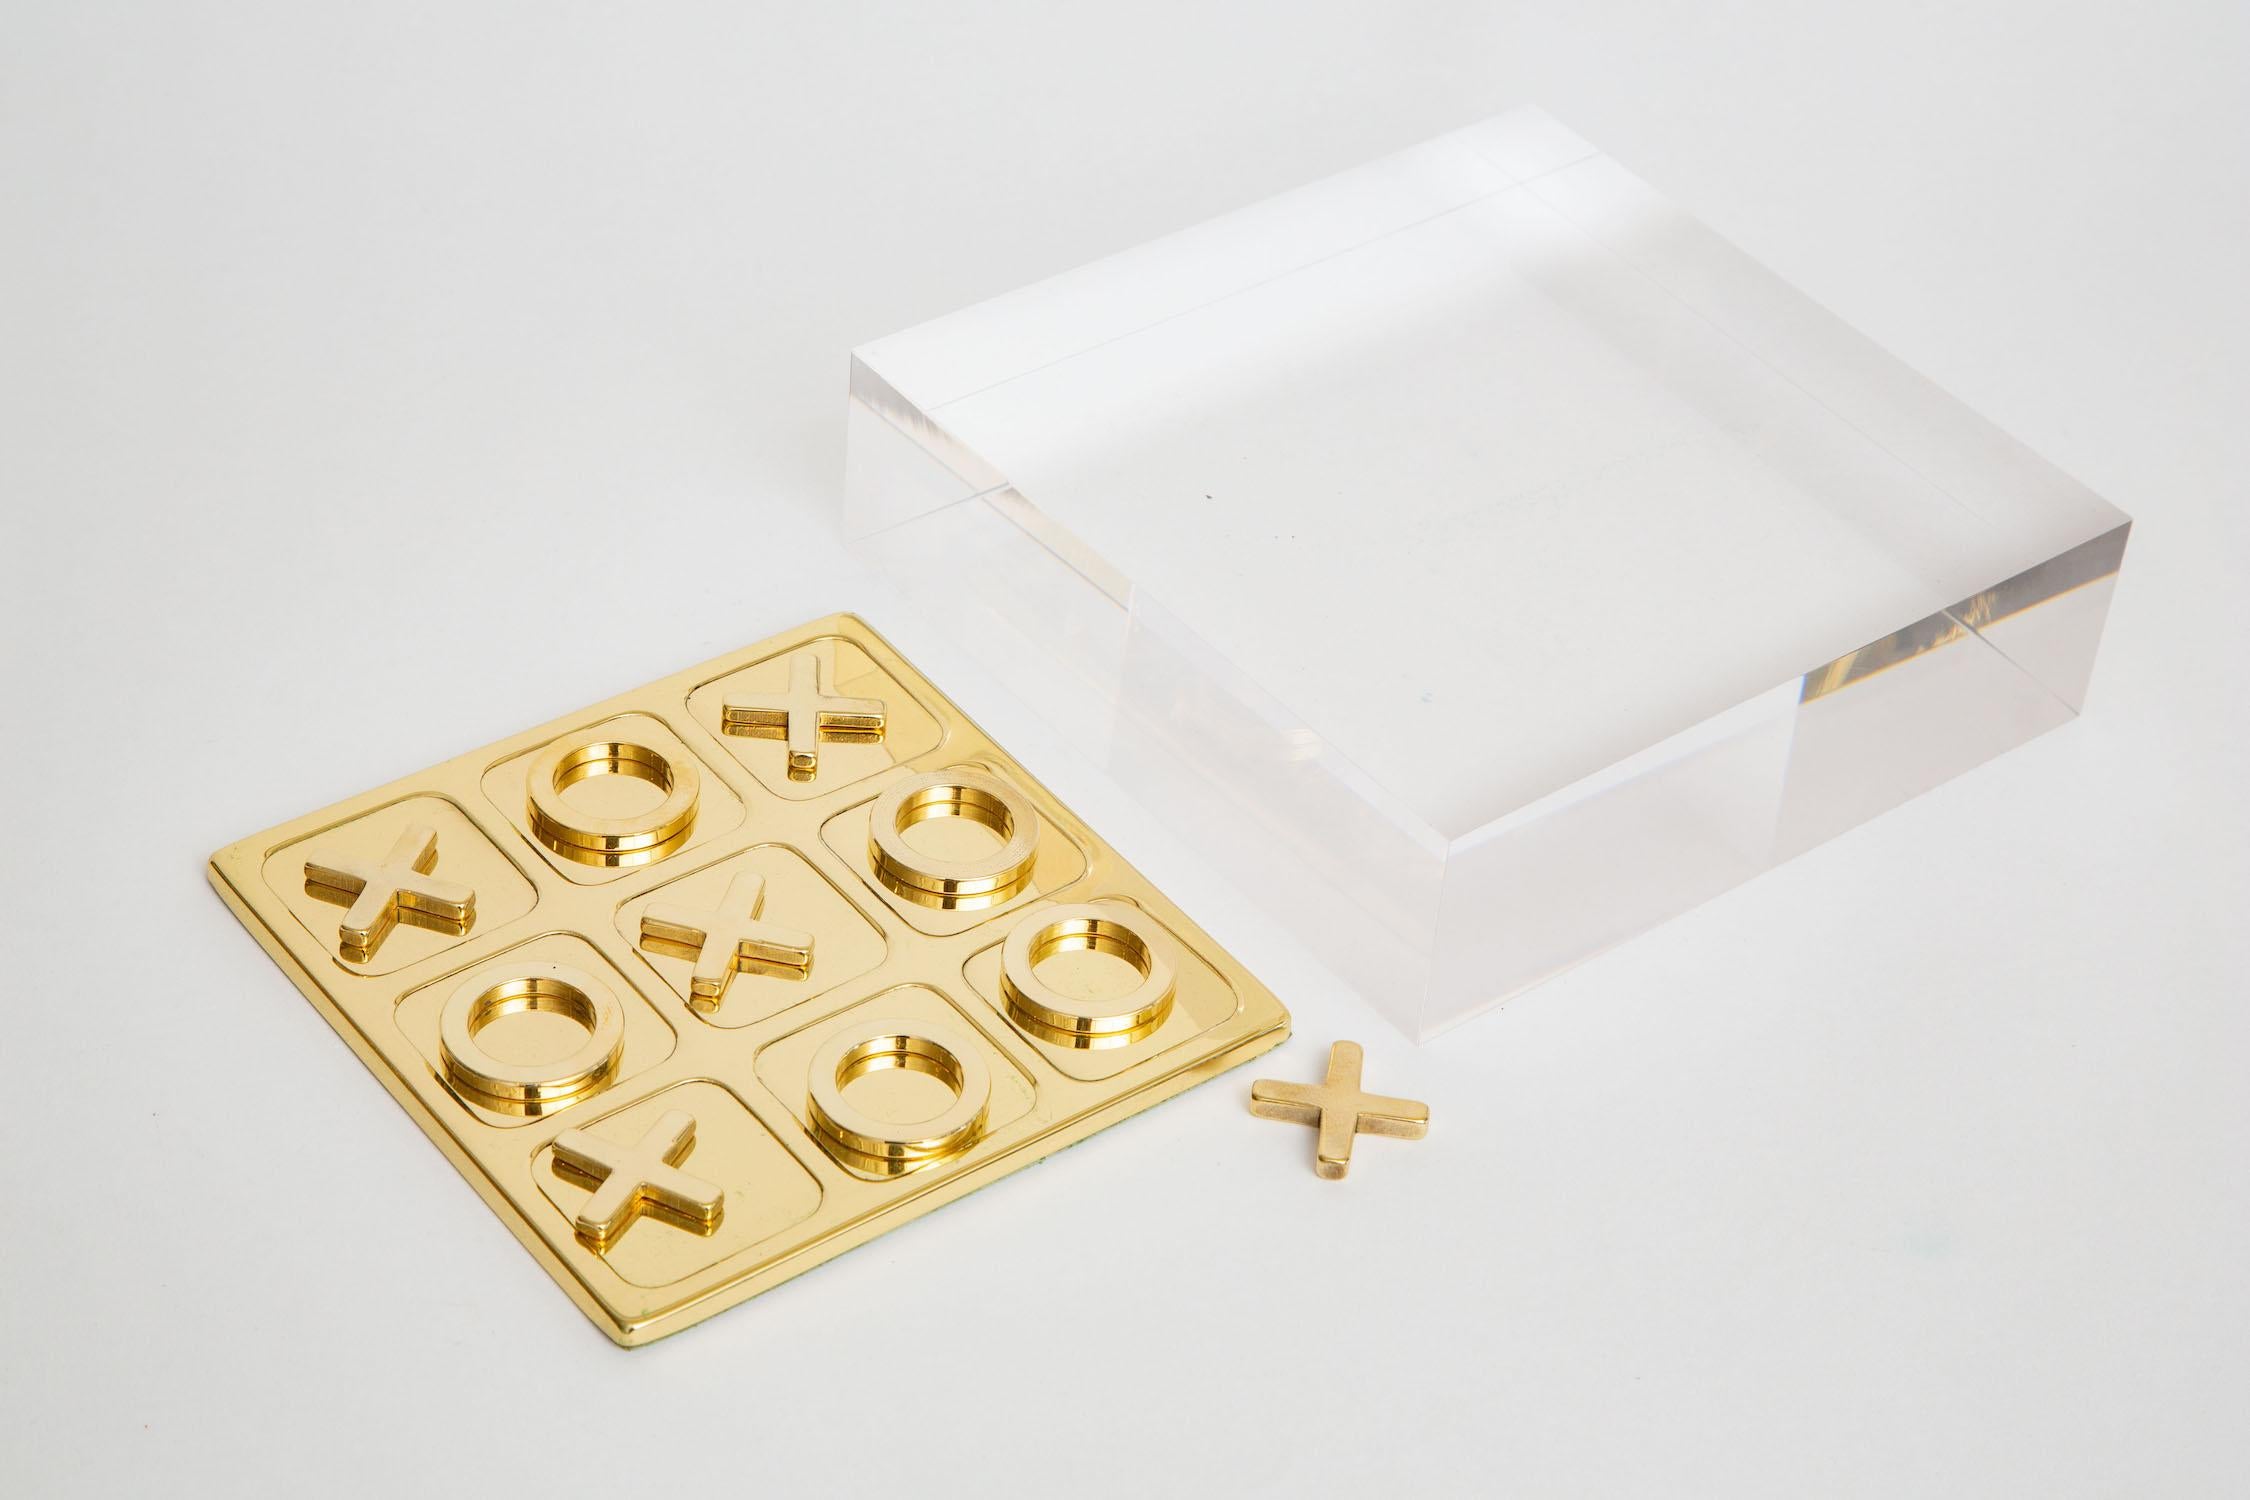  Vintage Brass Tic Tac Toe Set Game on Custom Lucite Base In Good Condition For Sale In North Miami, FL